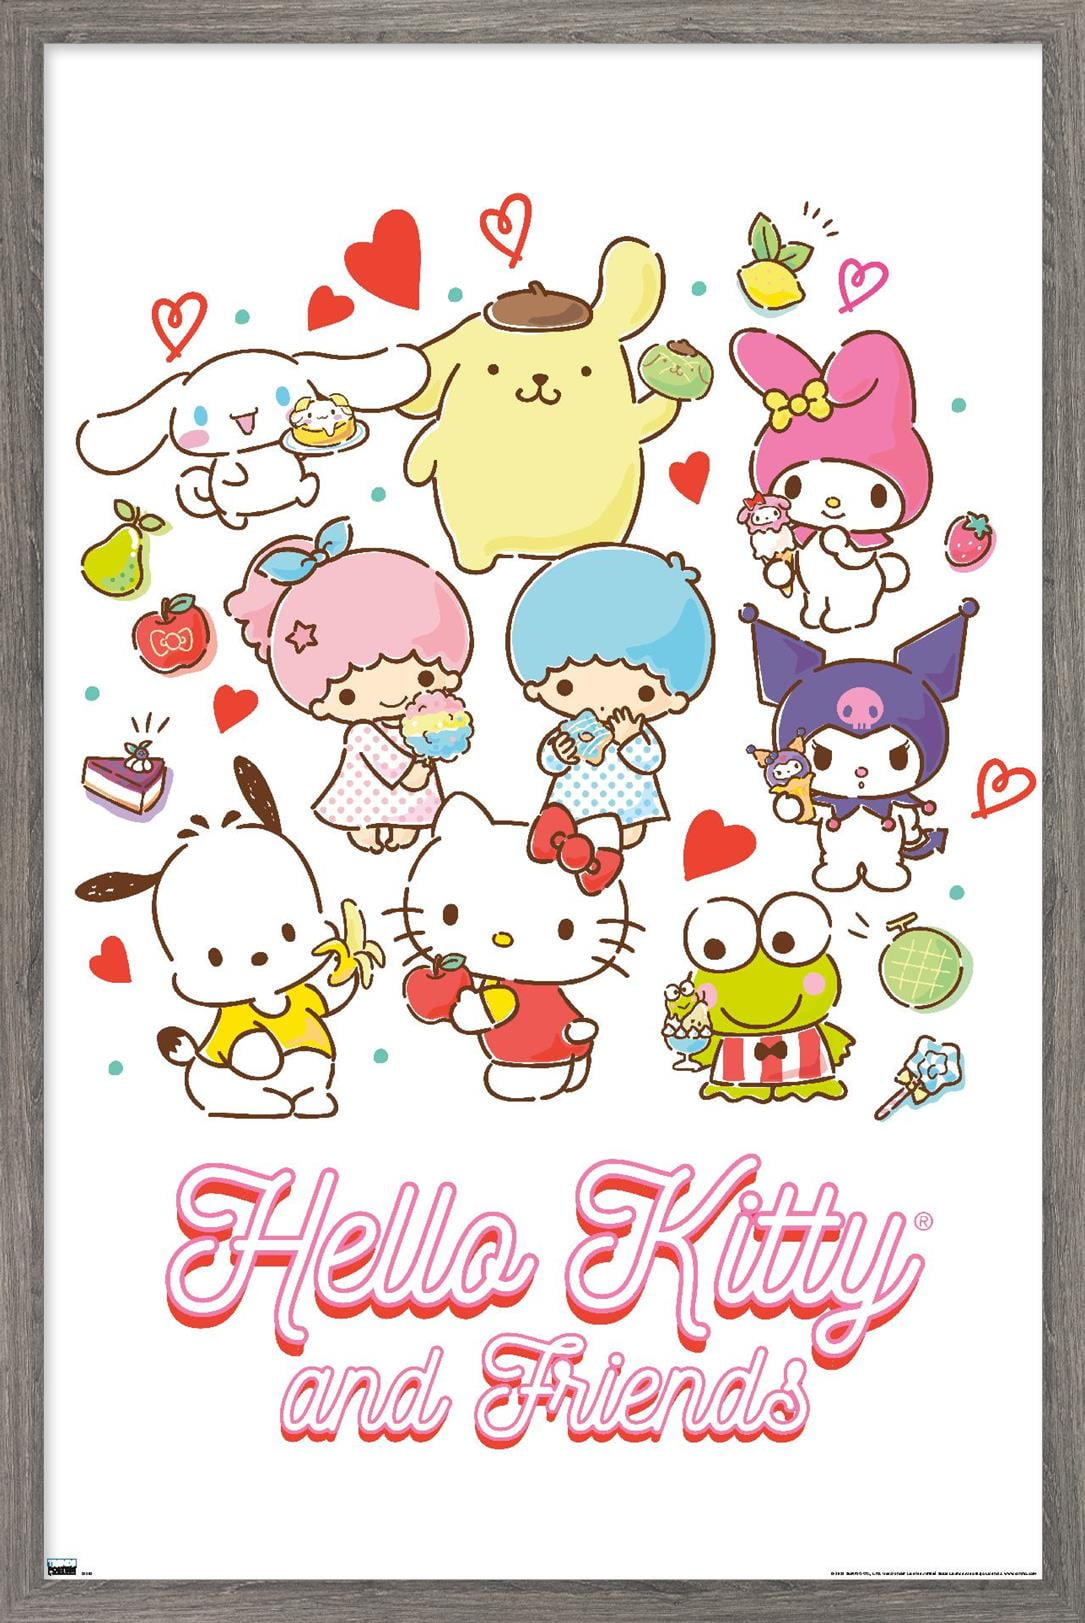 Hello Kitty and Friends - Kawaii Favorite Flavors Wall Poster, 14.725 inch x 22.375 inch Framed, FR23302BWD14X22EC